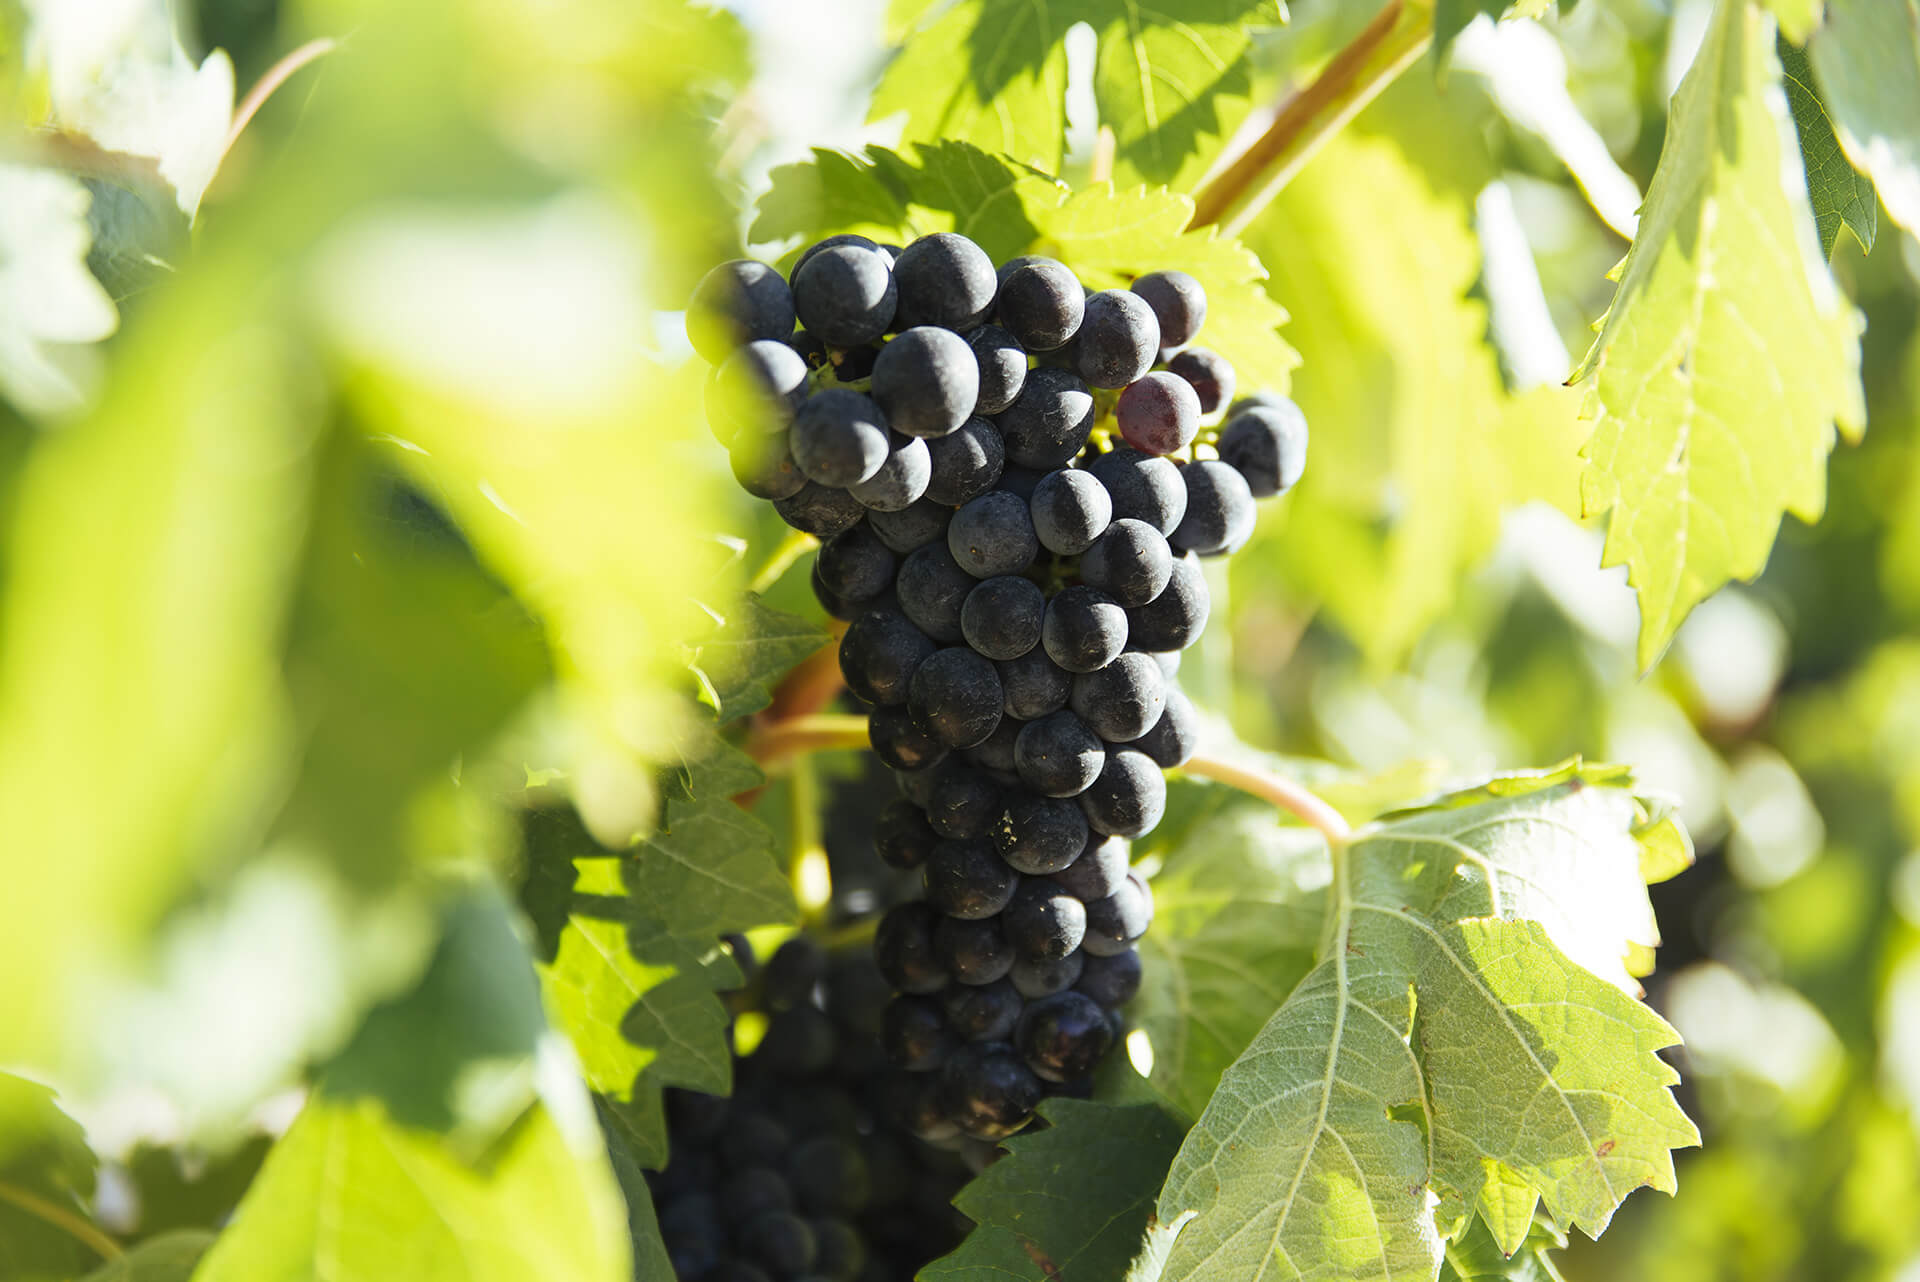 Ripening status report No. 4: closely monitor vineyards after rainfall